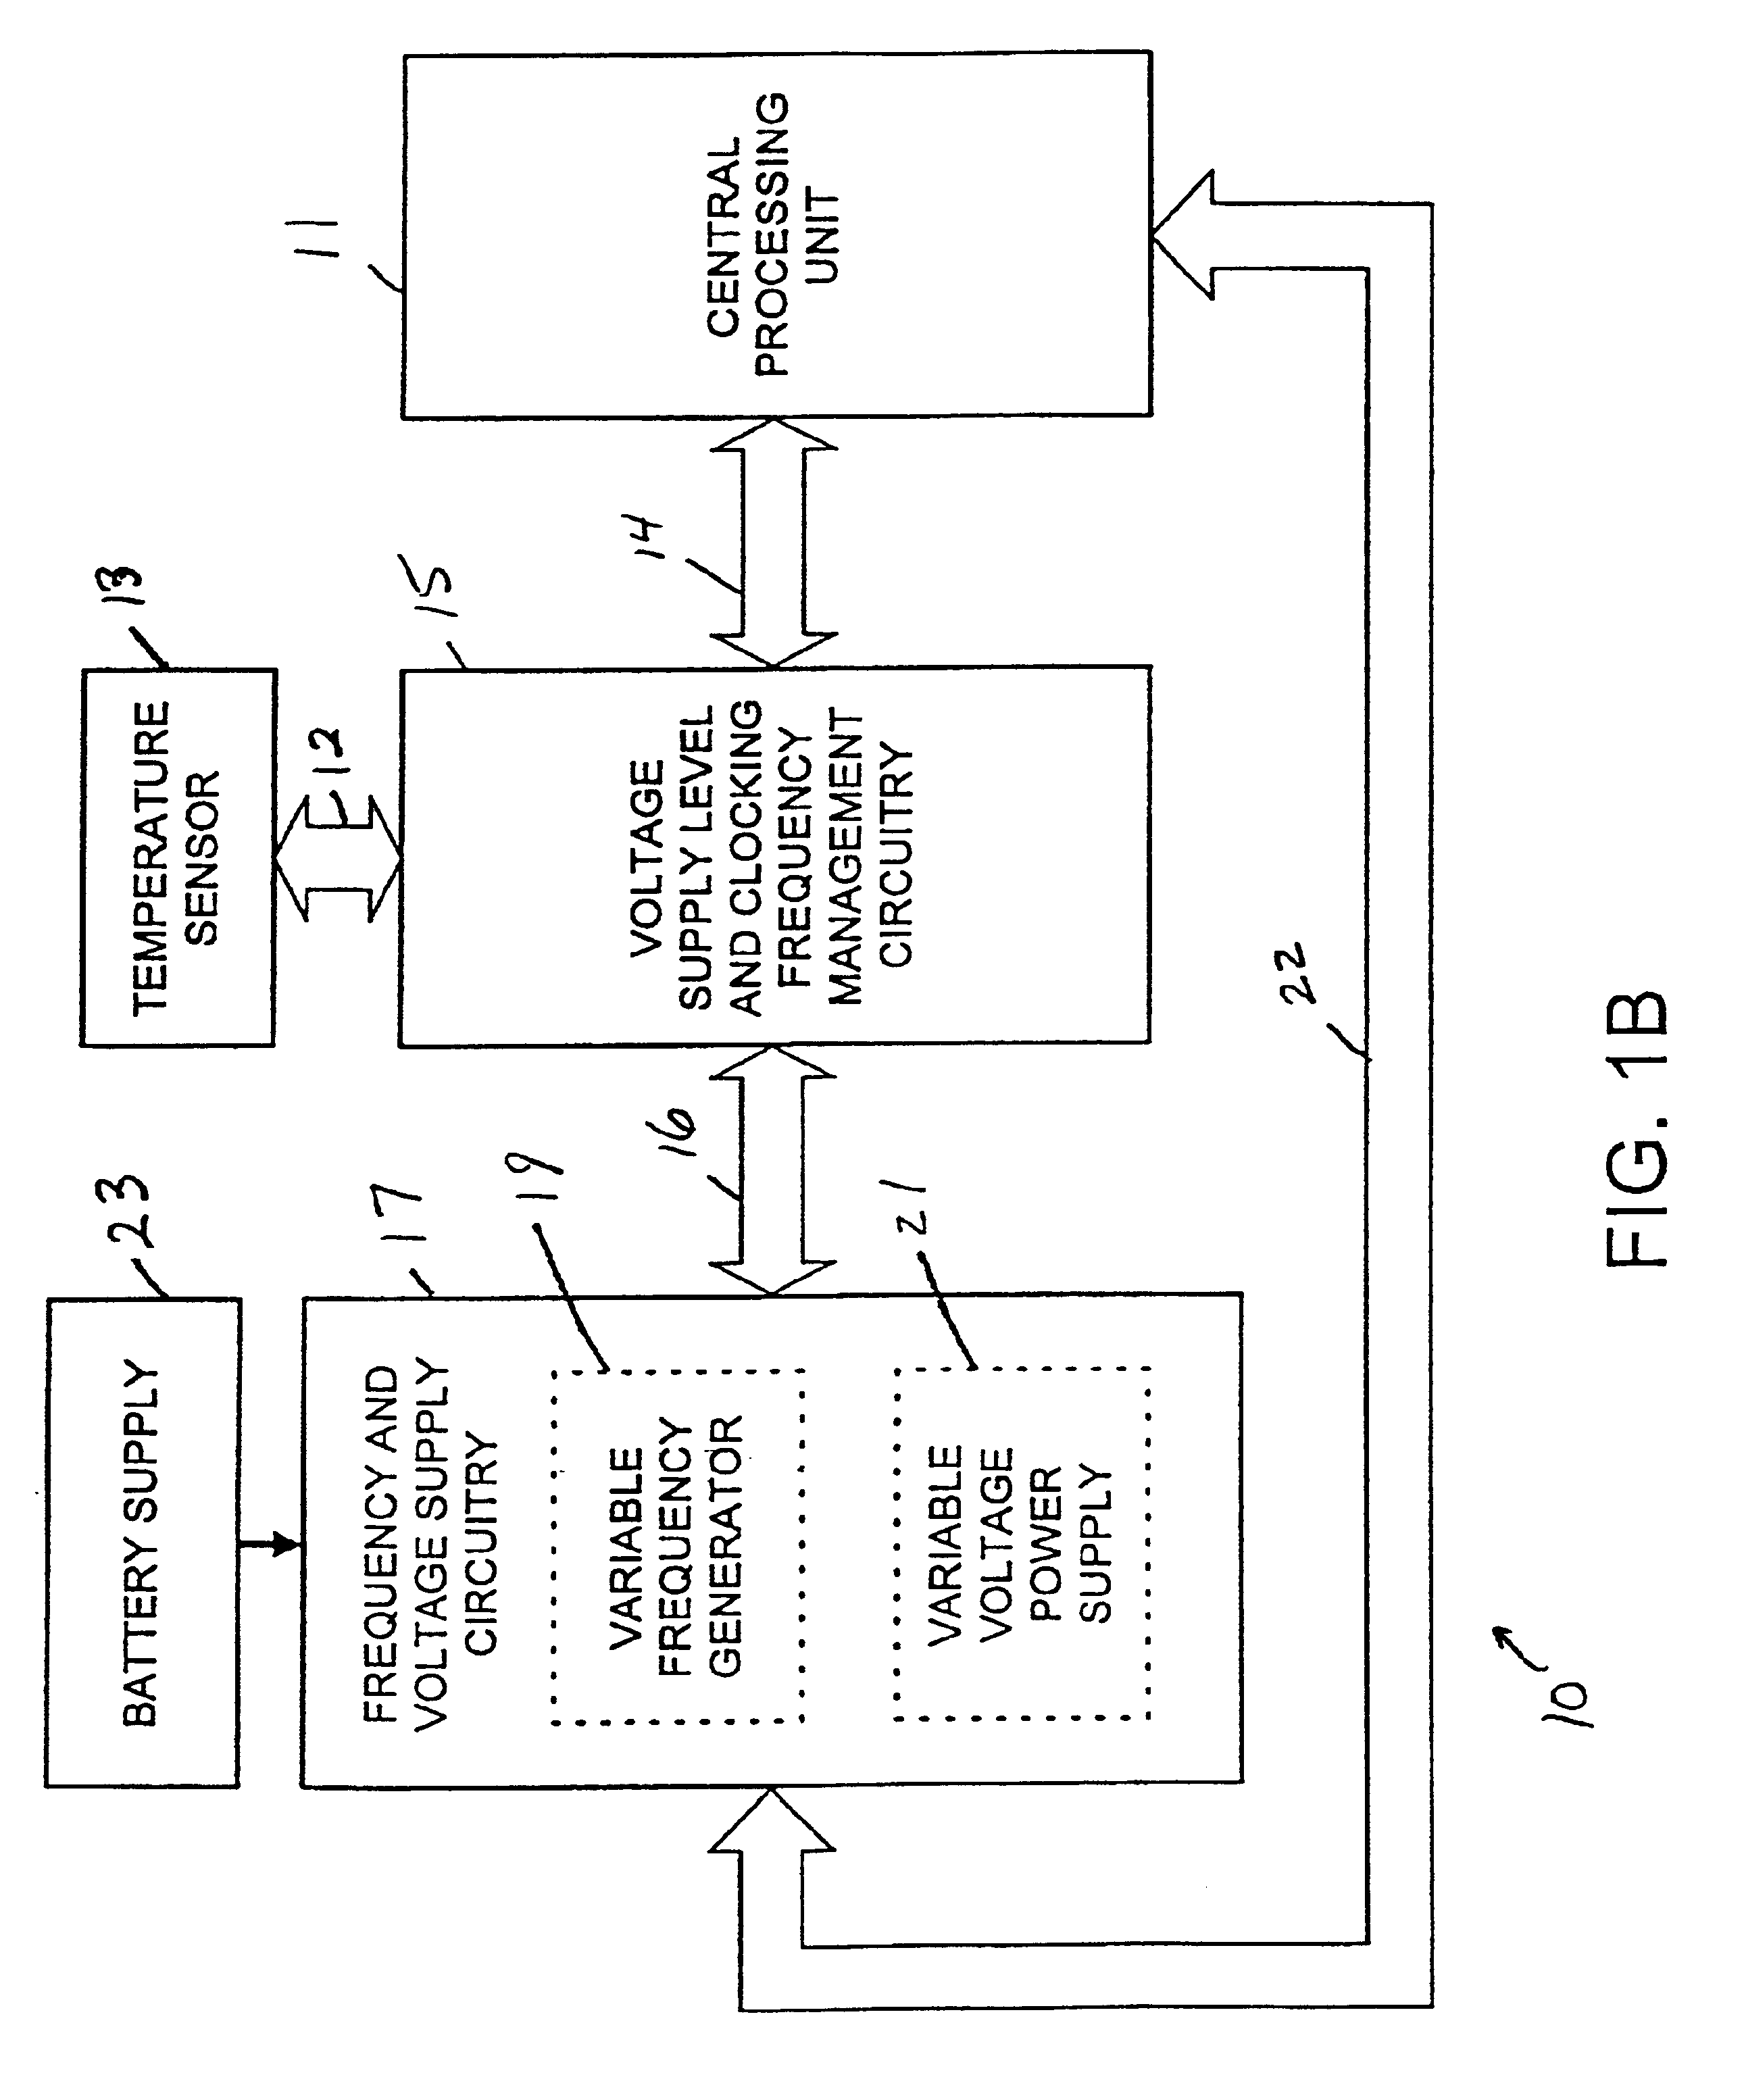 Battery powered device with dynamic power and performance management